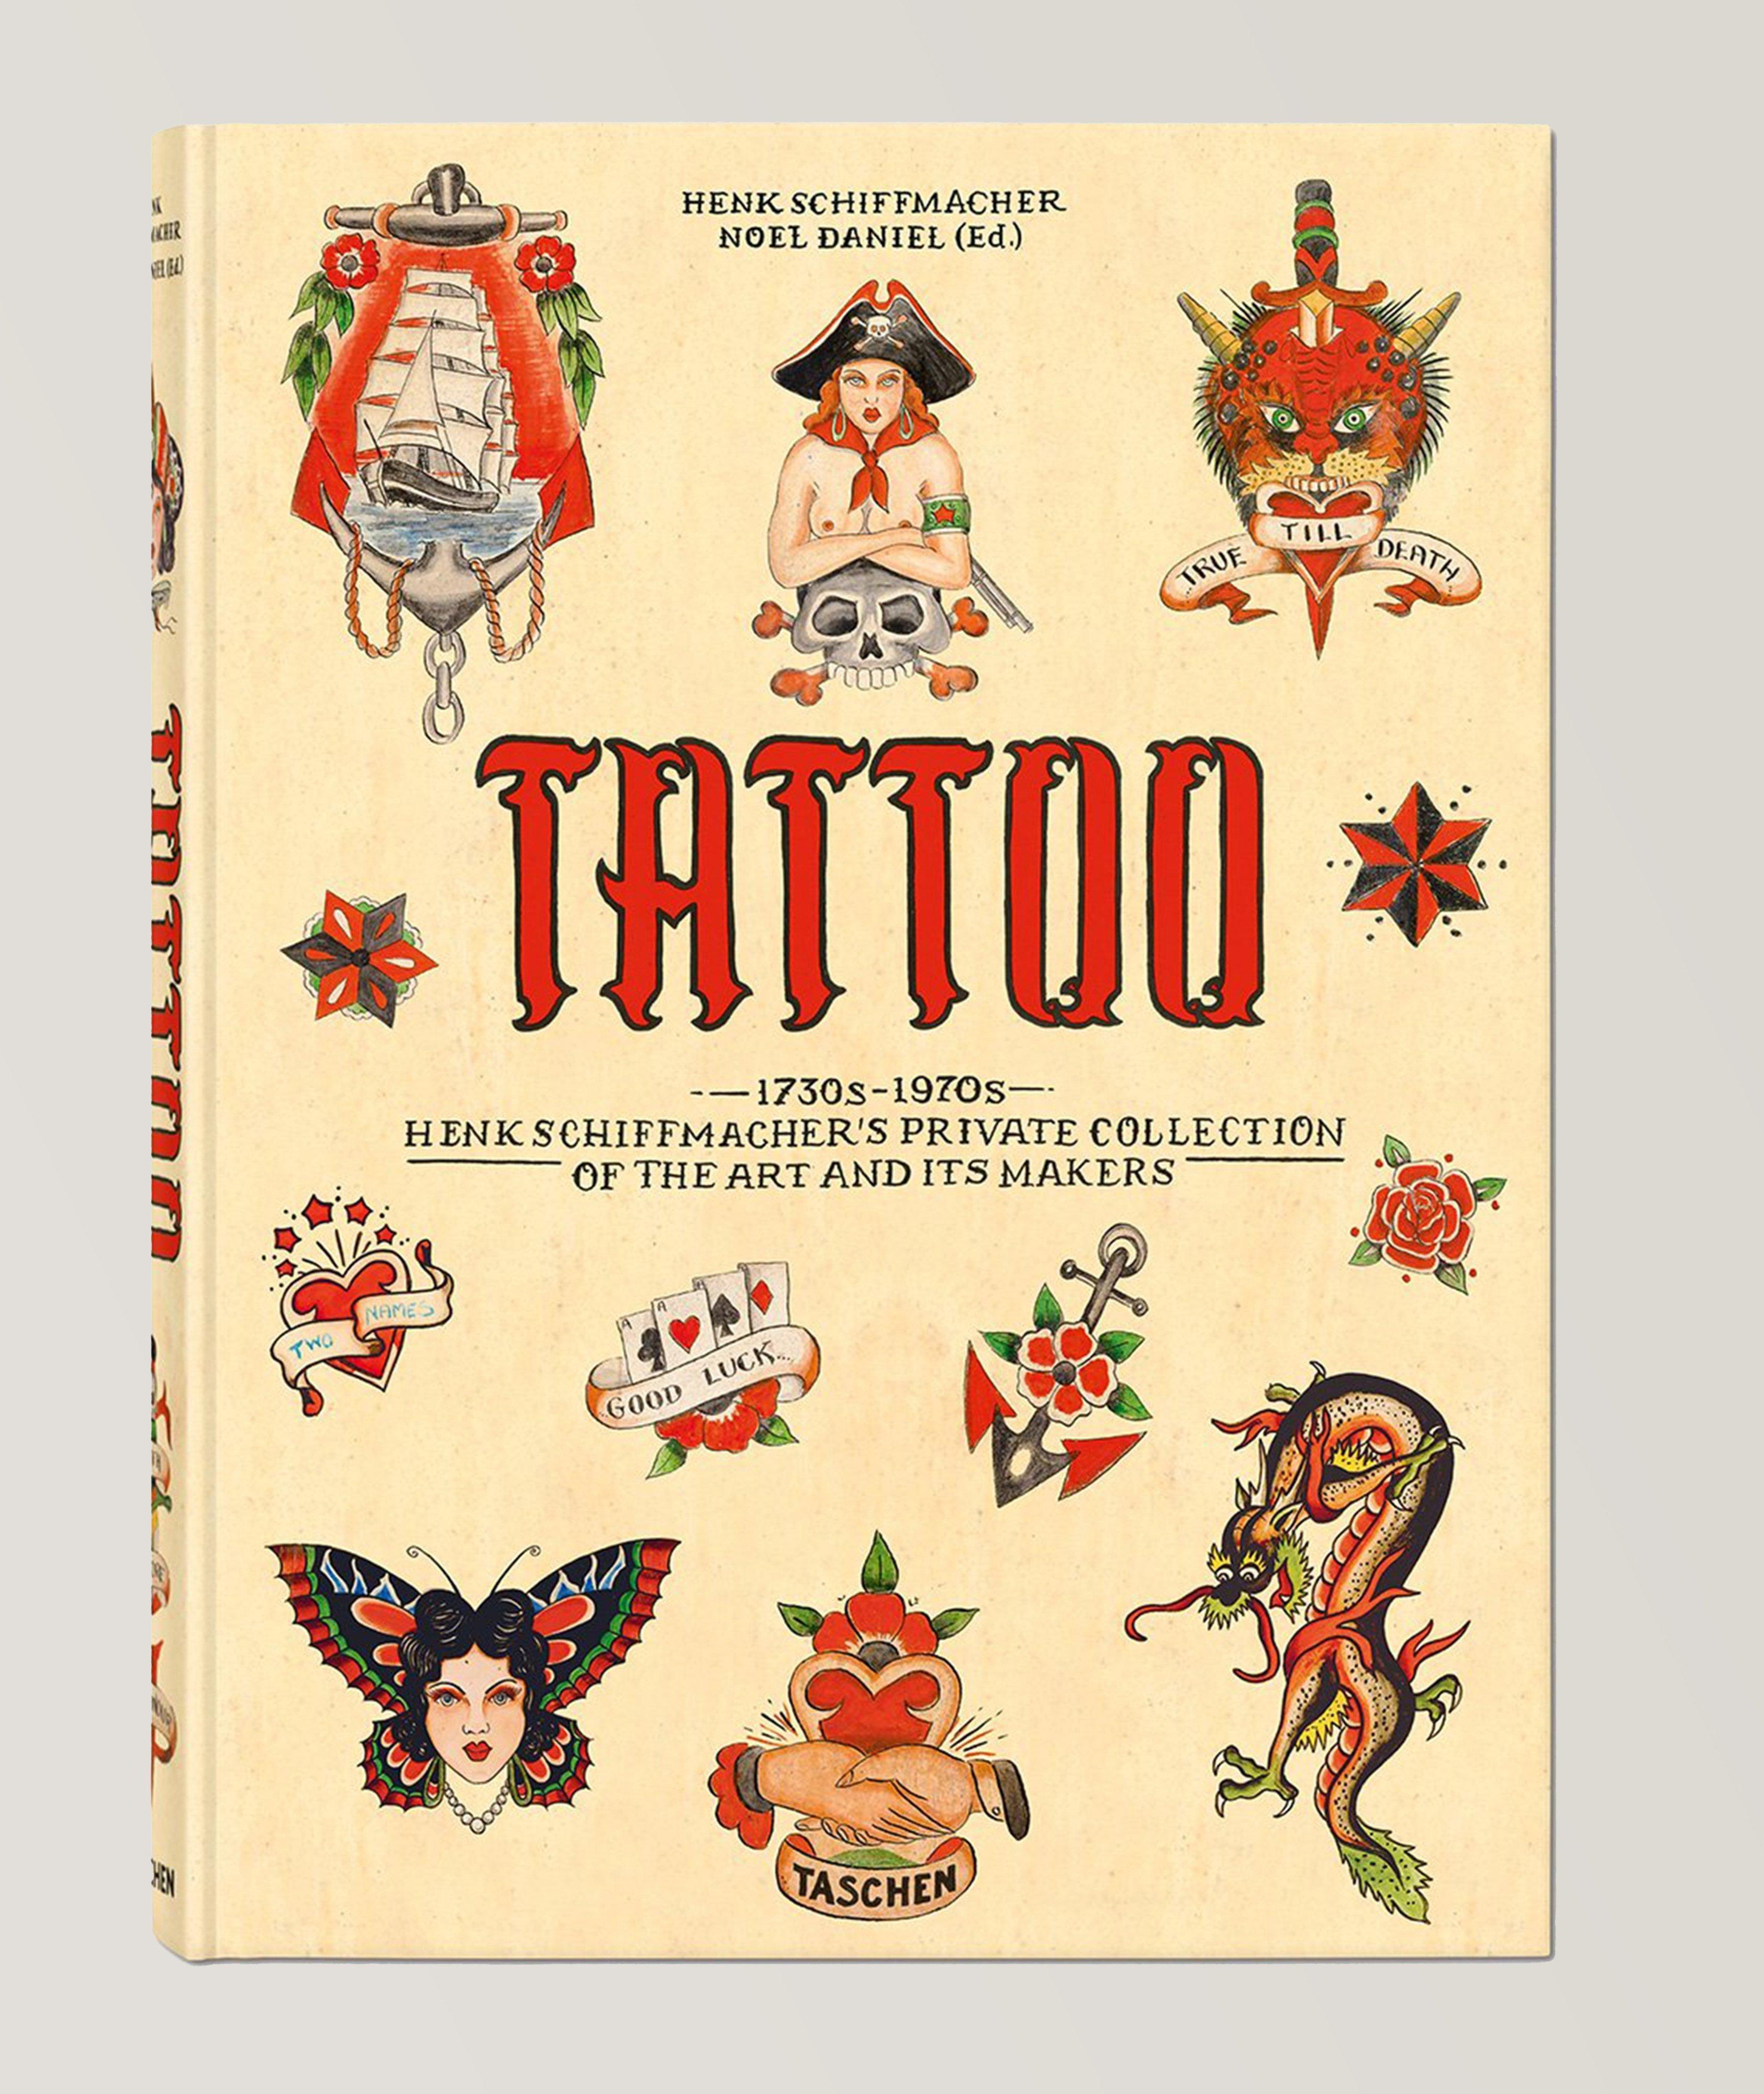 TATTOO. 1730s-1970s. Henk Schiffmacher’s Private Collection image 0